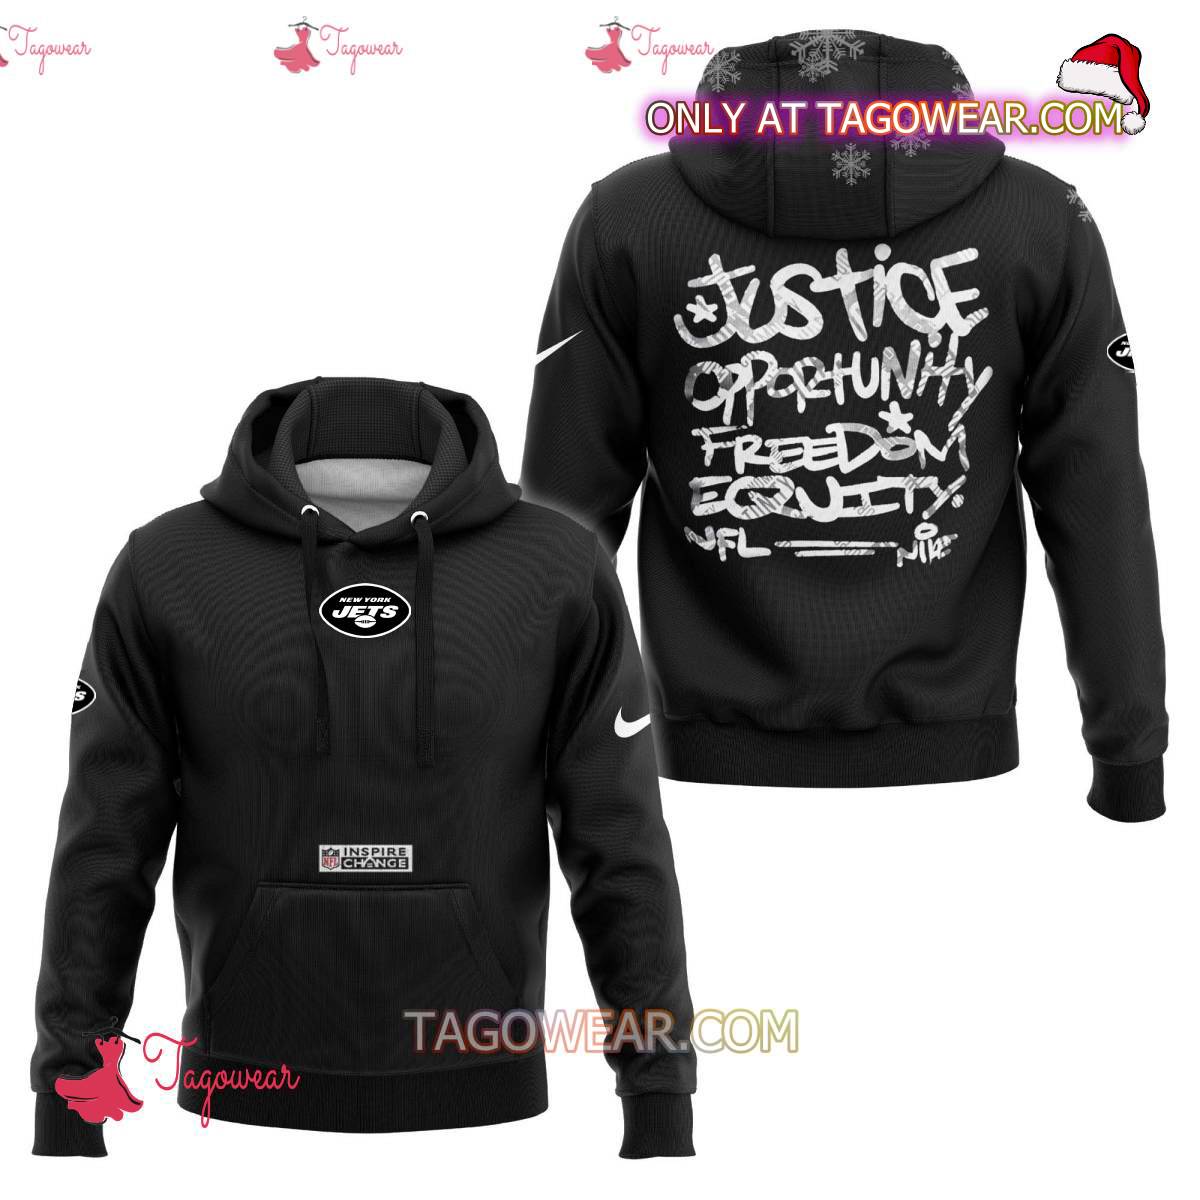 New York Jets NFL Inspire Change Justice Opportunity Equality Freedom Hoodie